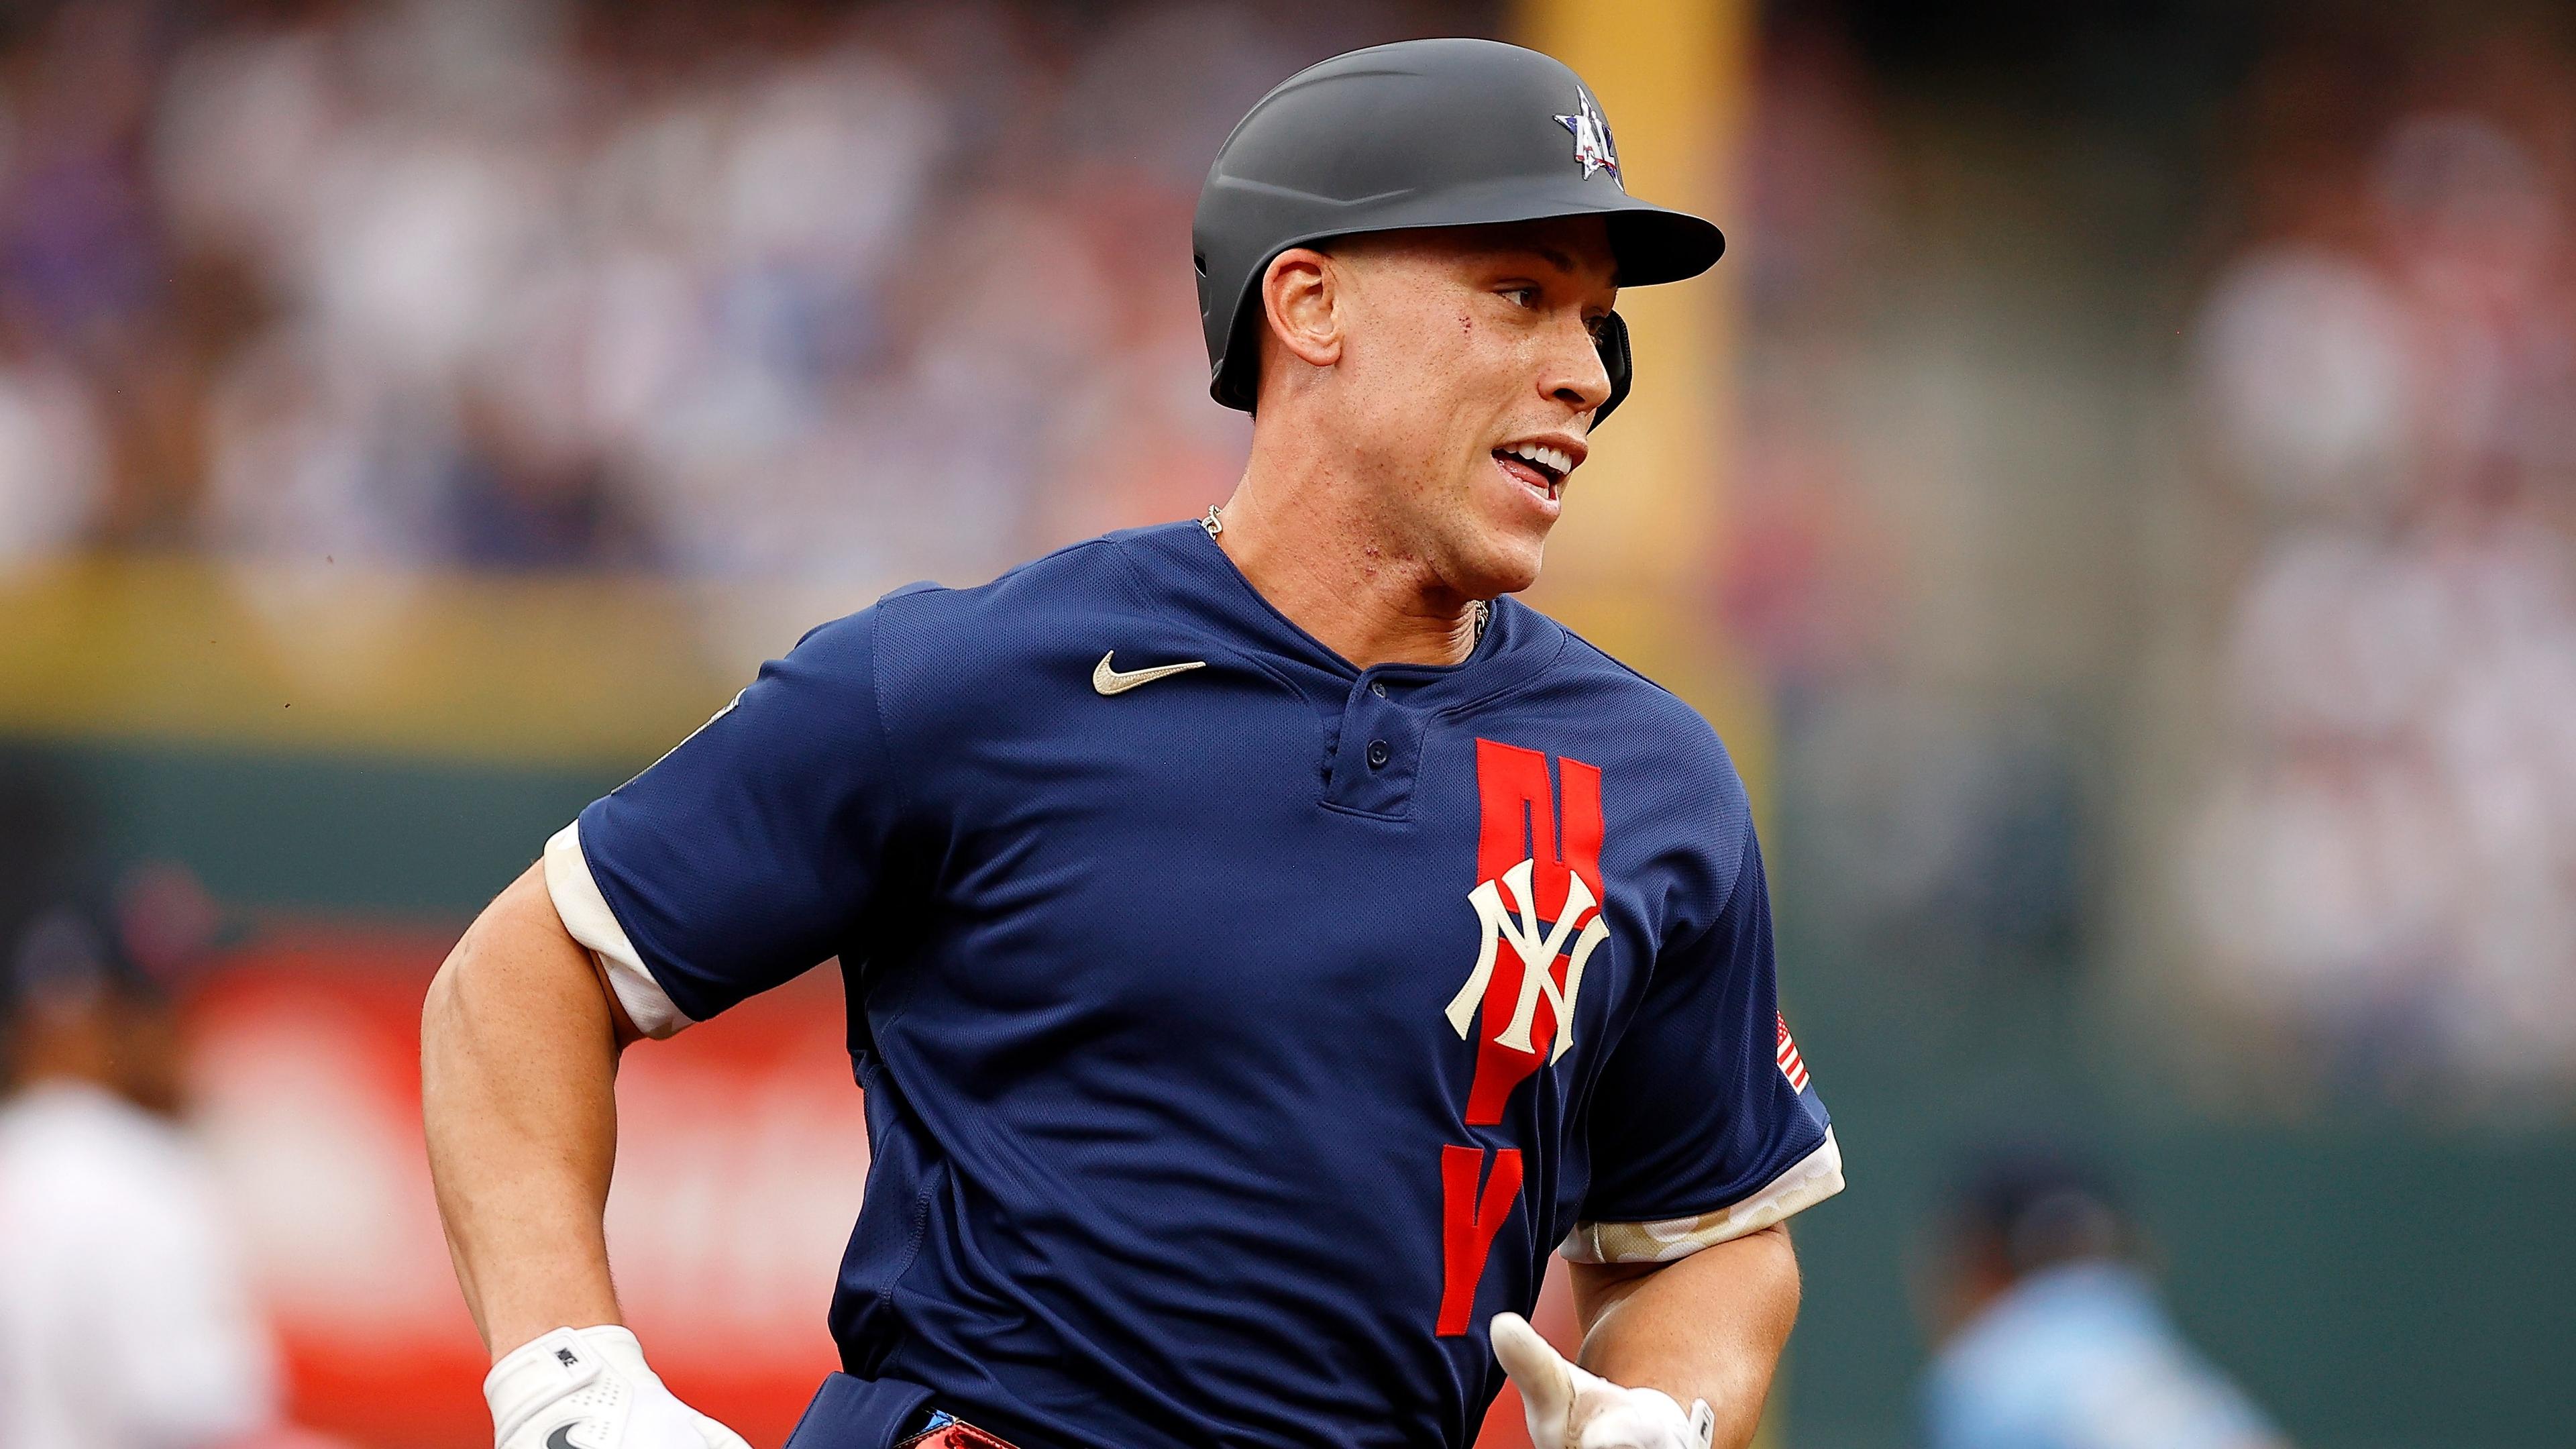 Jul 13, 2021; Denver, Colorado, USA; American League right fielder Aaron Judge of the New York Yankees (99) runs to third base on a double hit by third baseman Rafael Devers of the Boston Red Sox (not pictured) during the second inning during the 2021 MLB All Star Game at Coors Field. / © Isaiah J. Downing-USA TODAY Sports